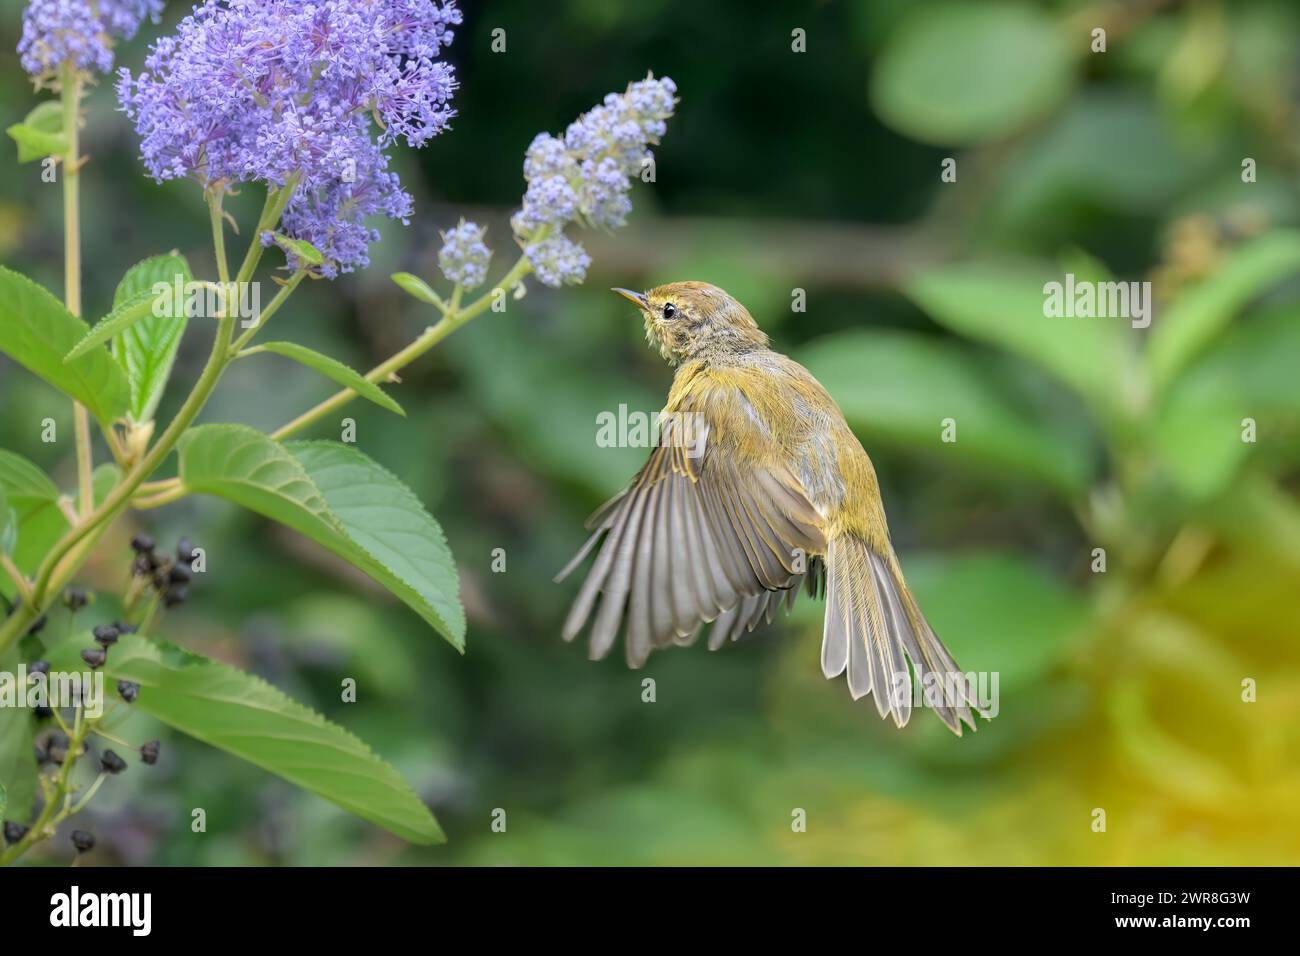 Common chiffchaff bird, Phylloscopus collybita, looking for food and insects in a flowering shrub, Germany Stock Photo